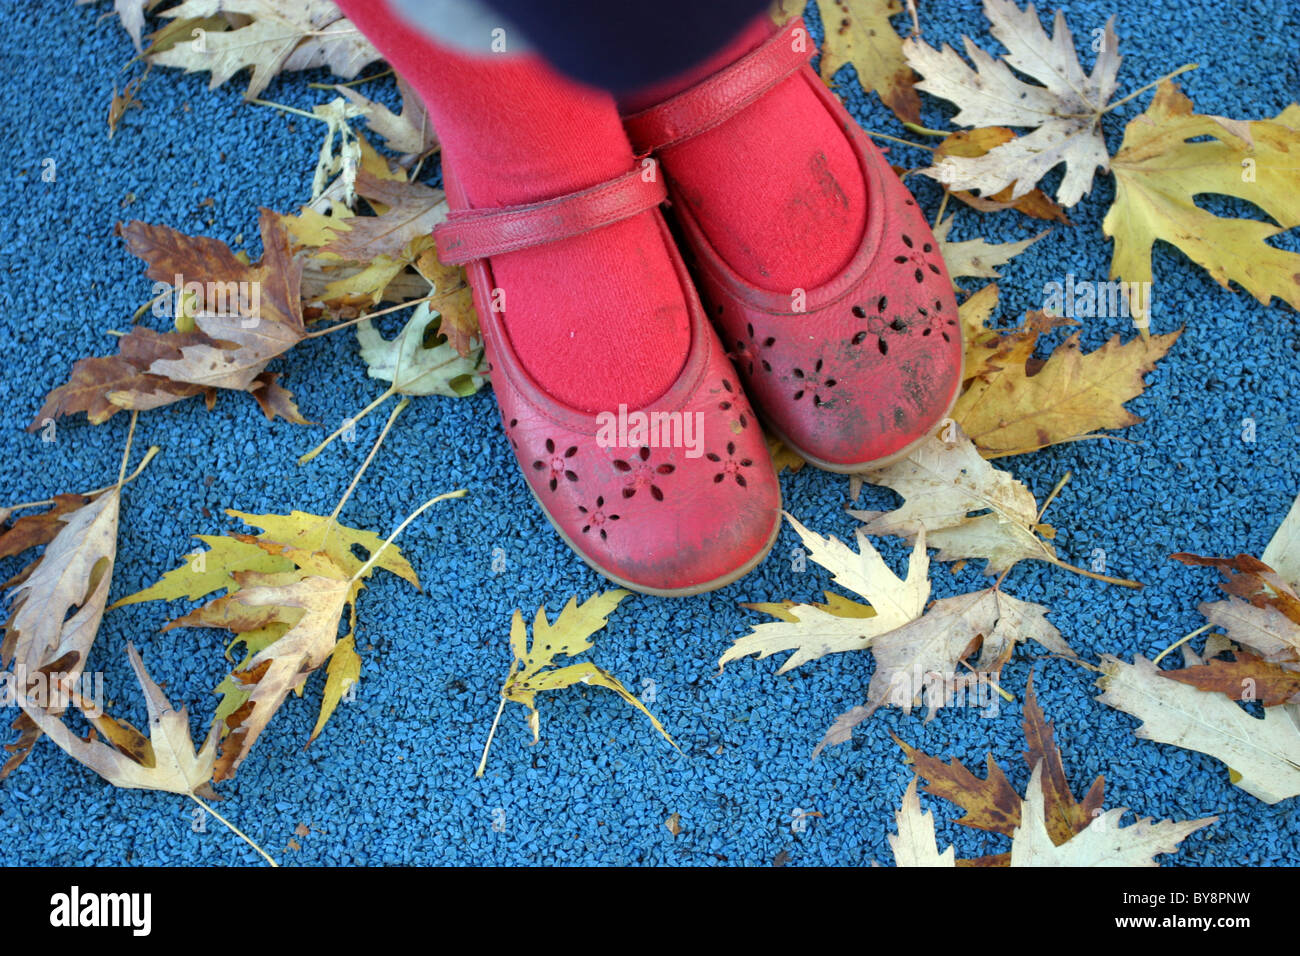 Young Girl Wearing Red Shoes Stock Photo